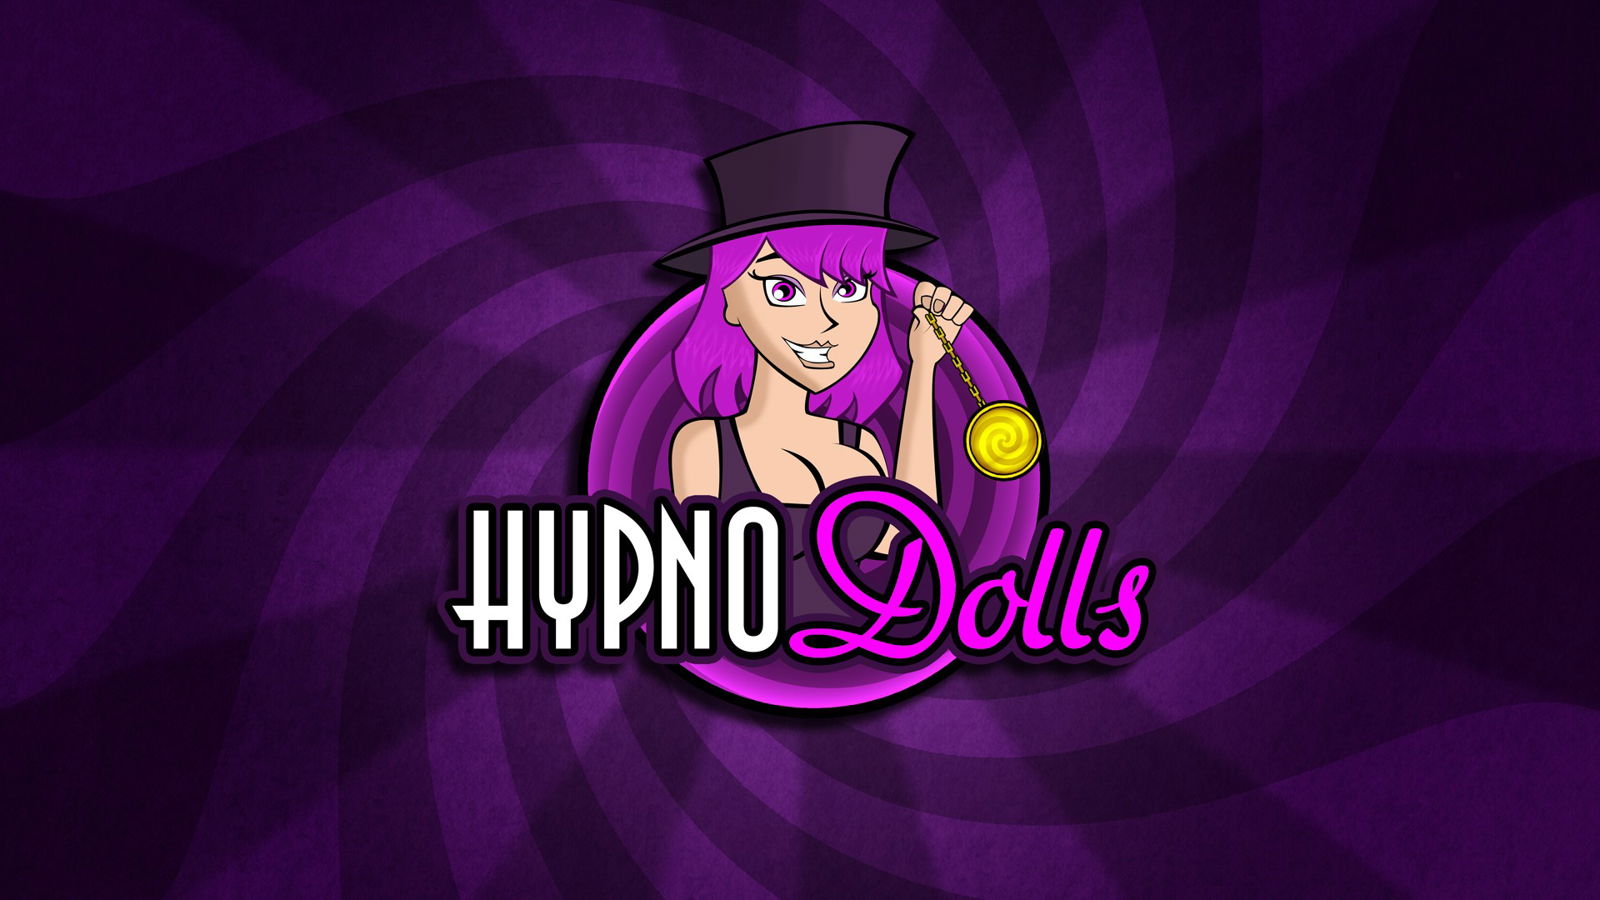 Watch the Photo by ObeyTheMasterHand with the username @ObeyTheMasterHand, posted on December 18, 2018 and the text says 'hypnodolls2:

Tumblr used TUMBLRGEDDON
It hurt itself in confusion.
Oh ffs. 
Sup all. Lex of Entrancement and Hypnodolls here. 
Whilst Tumblr’s busy burbling quietly to itself in the corner and making the majority of my content (even the none lewd stuff)..'